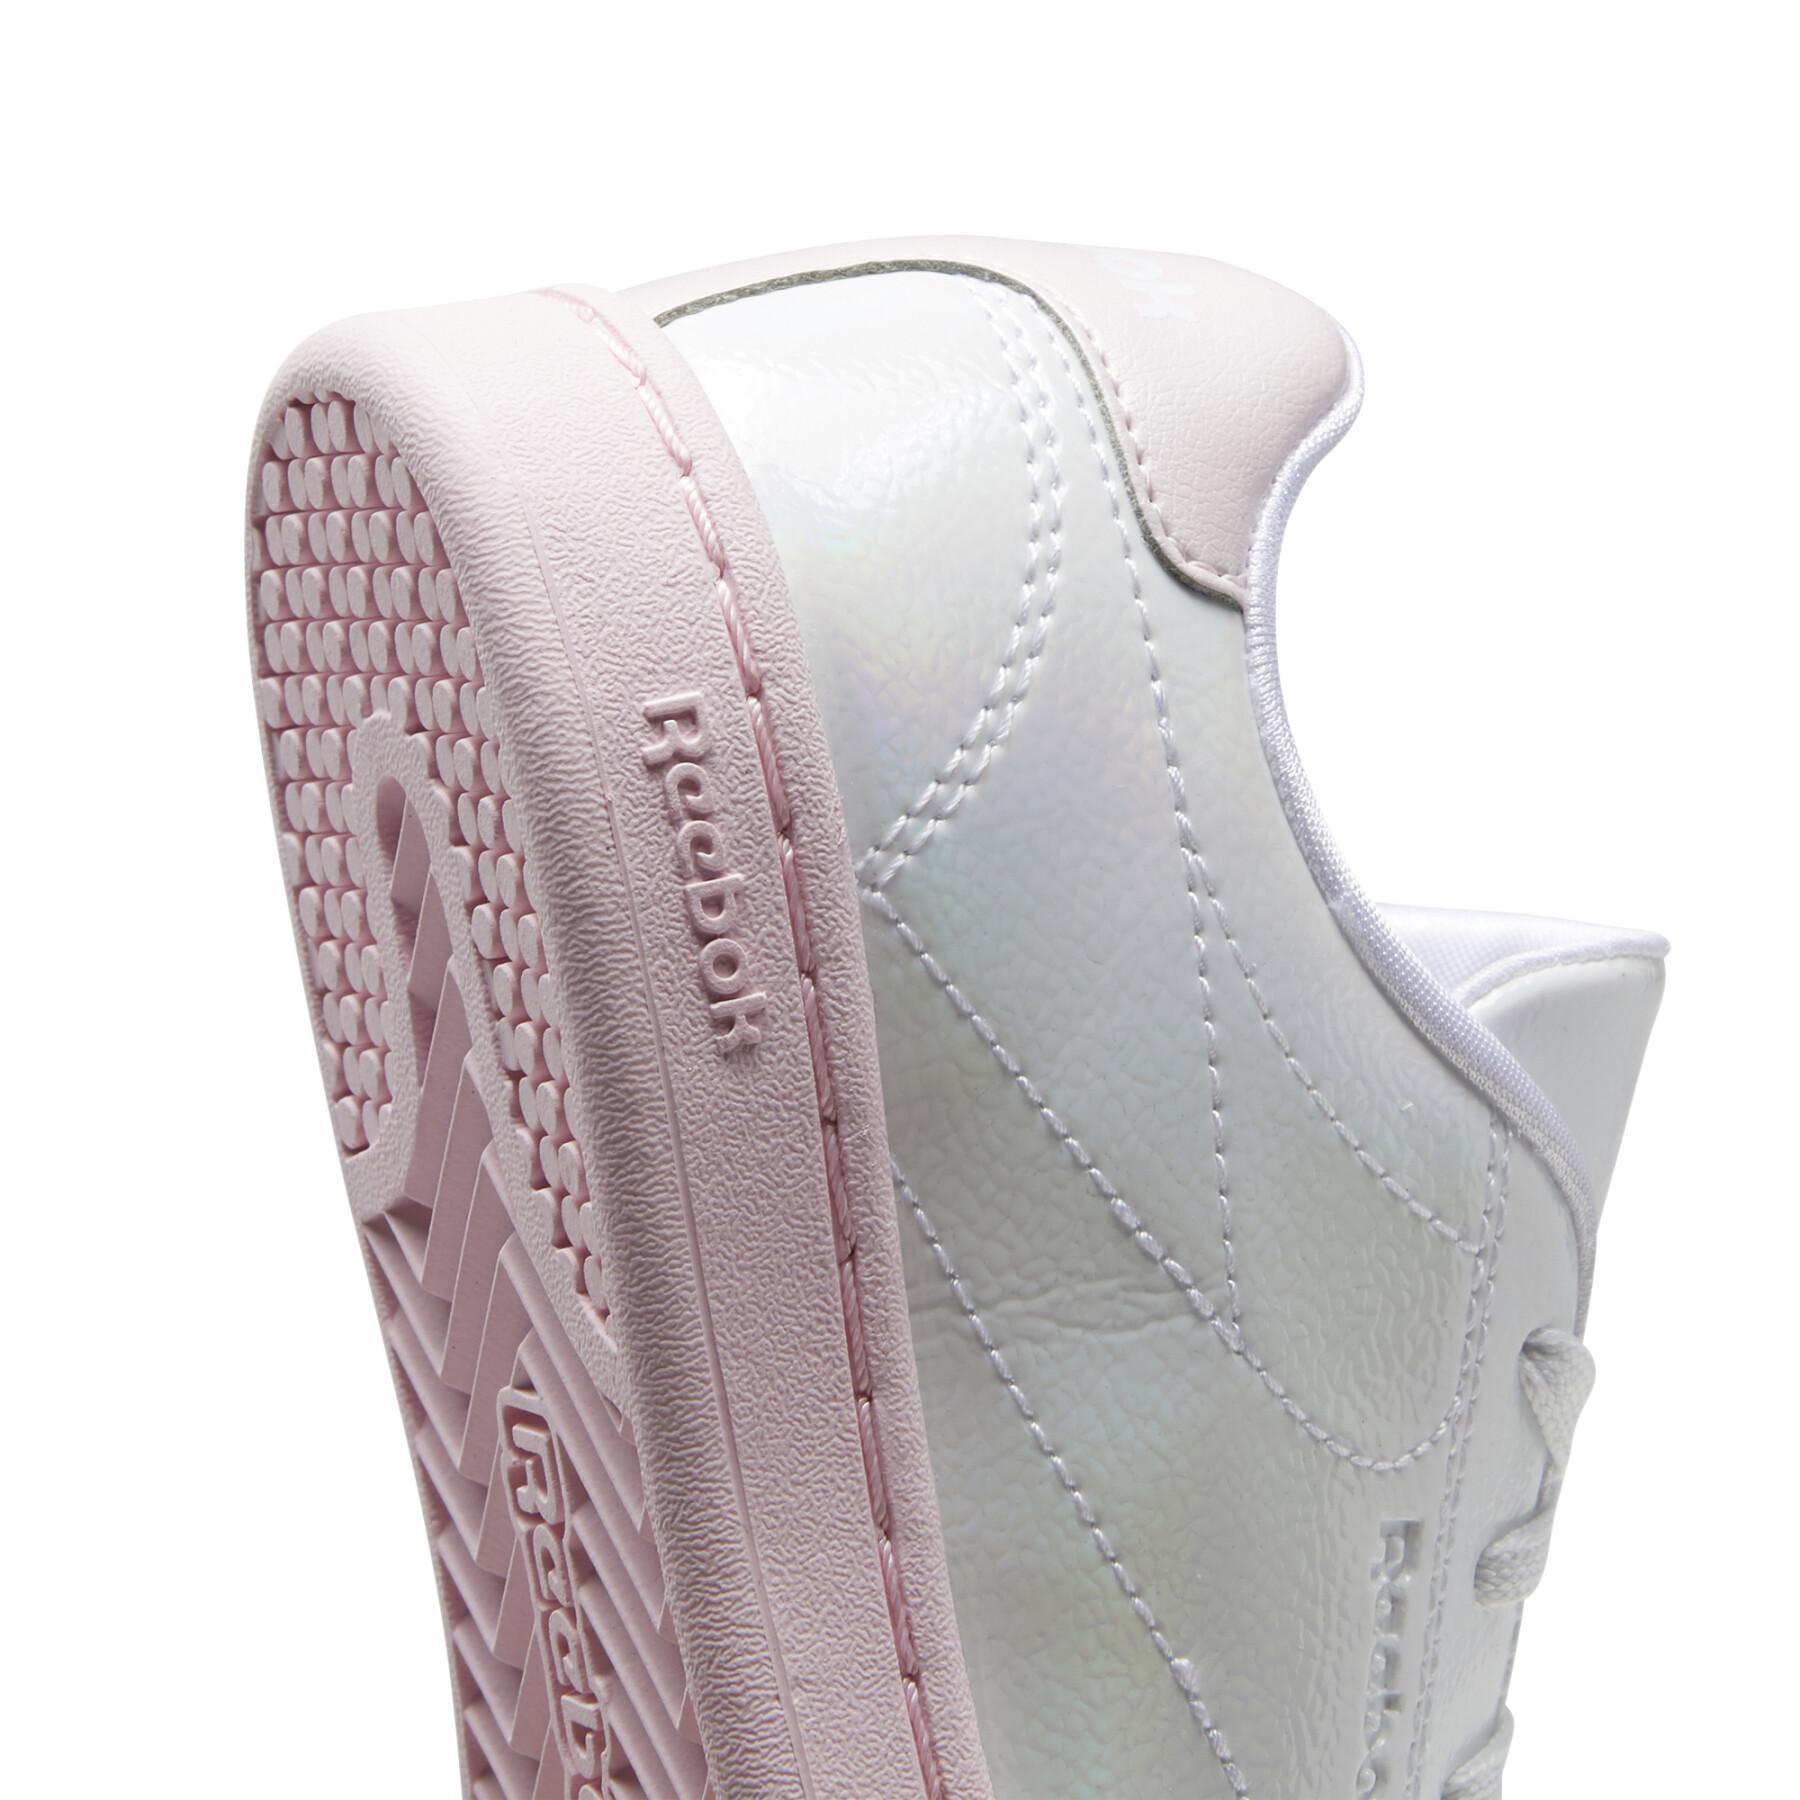 Girl's shoes Reebok Royal Complete CLN 2